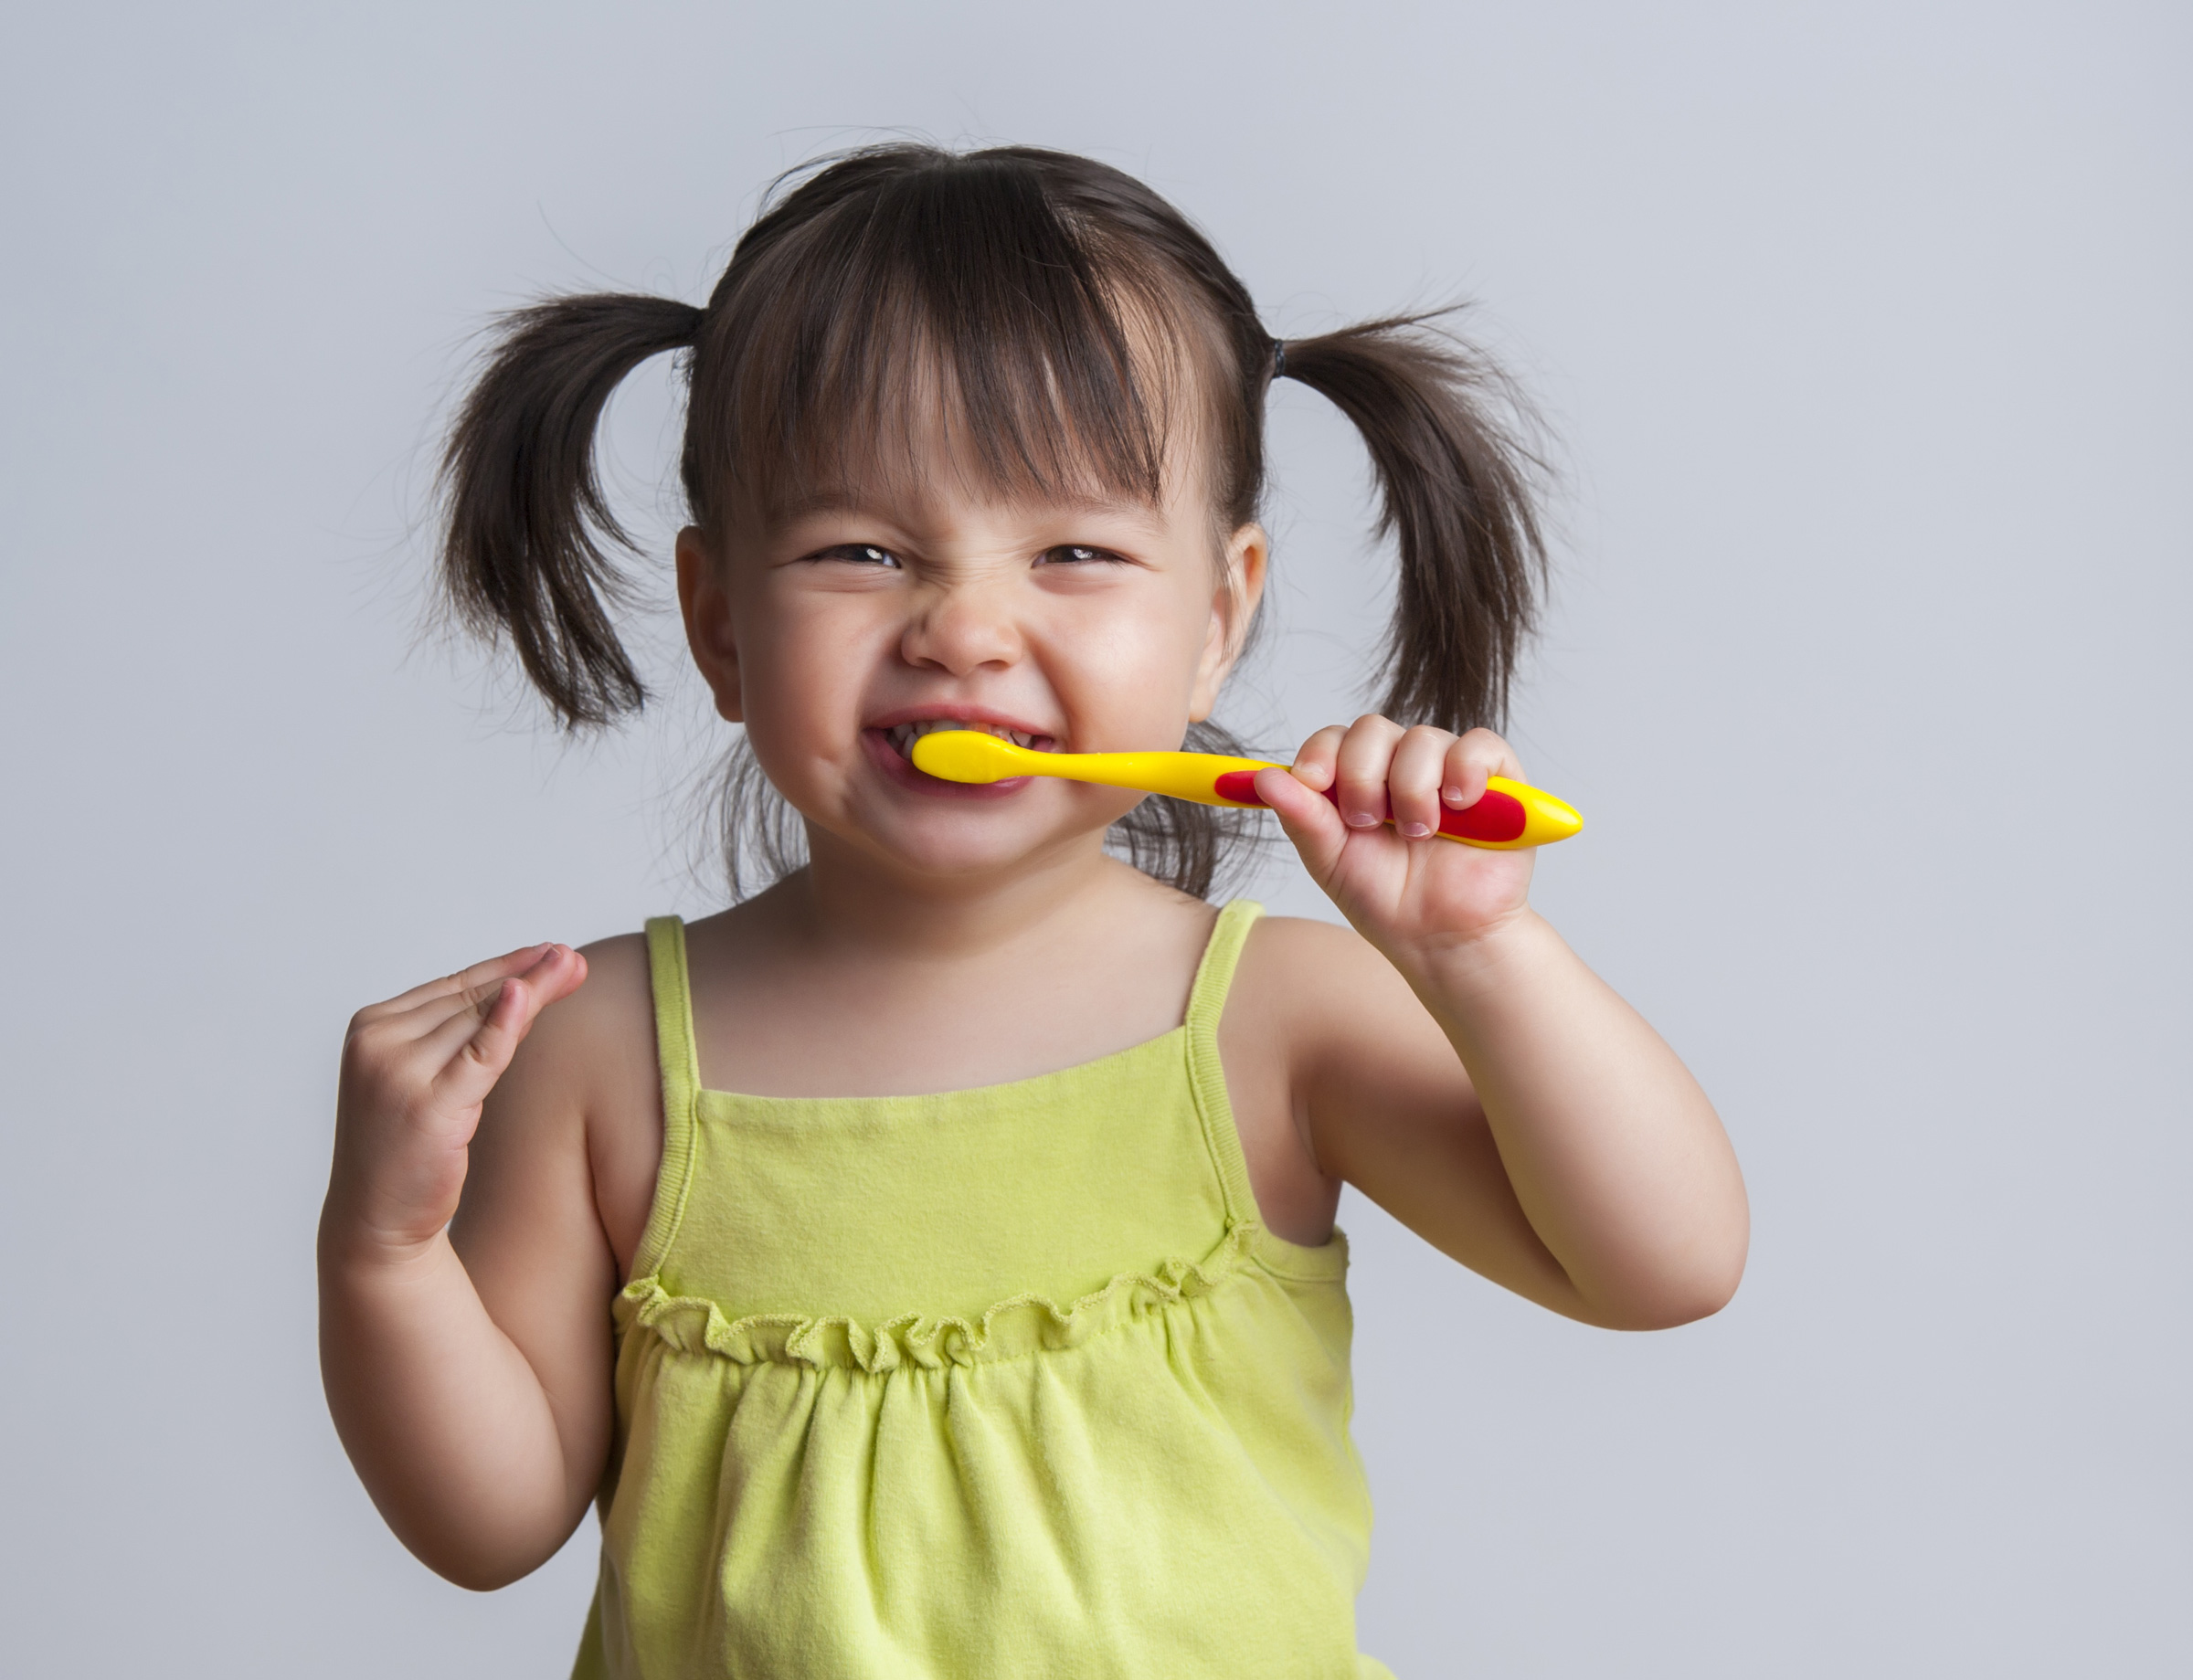 A young girl brushes her teeth with a kid sized toothbrush